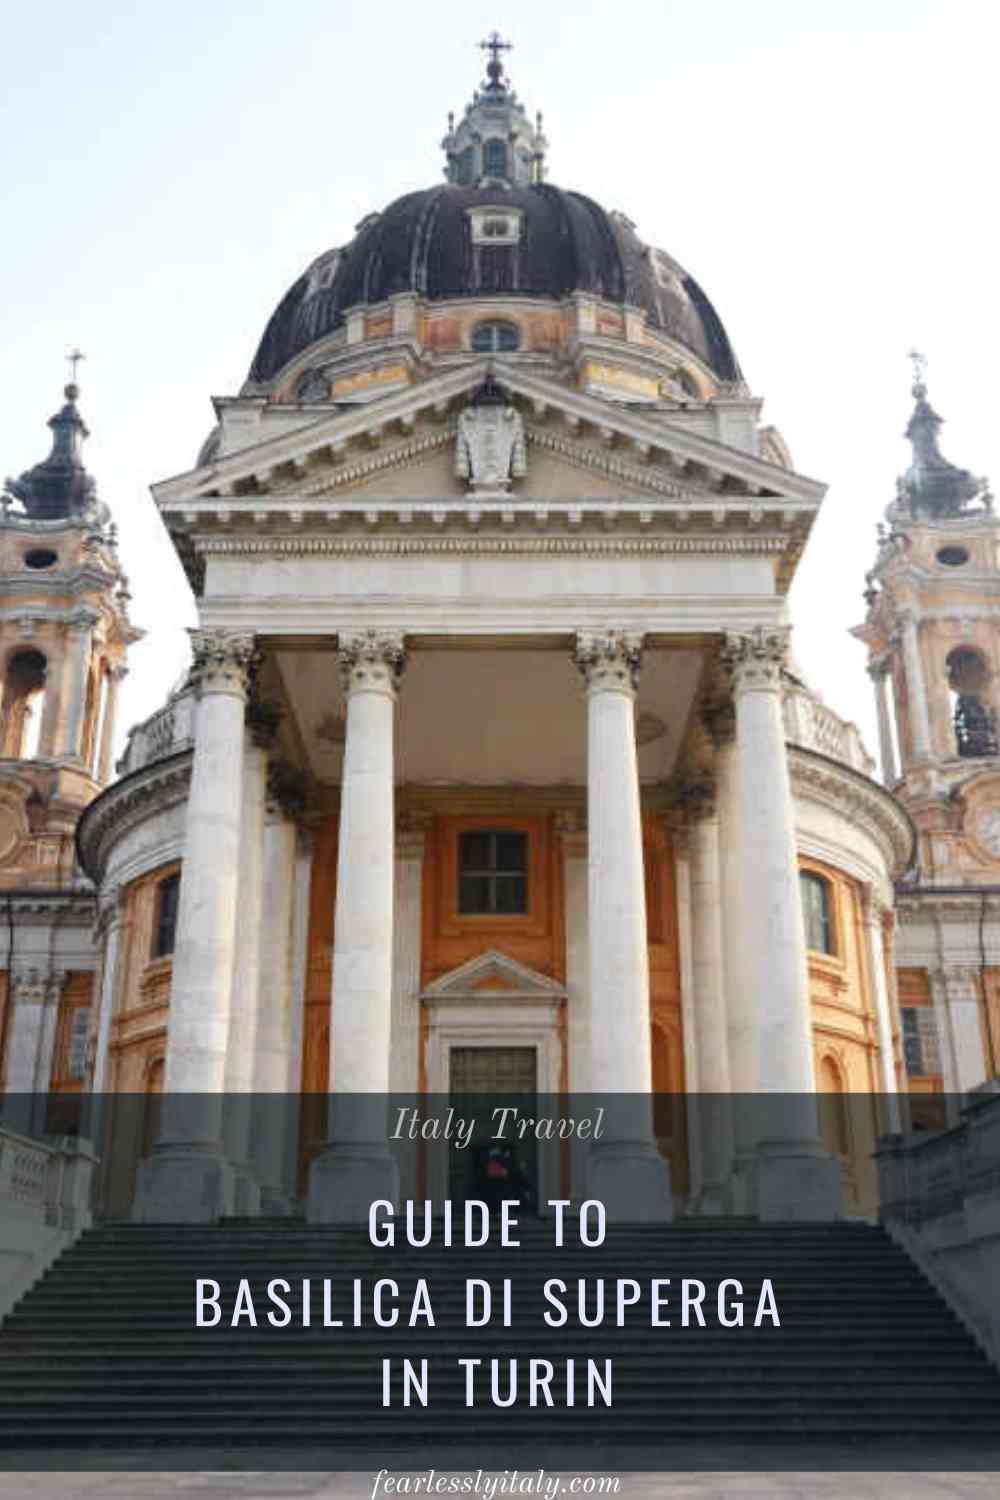 Pinterest image with image of Basilica of Superga with caption reading "Guide to Basilica di Superga in Turin"